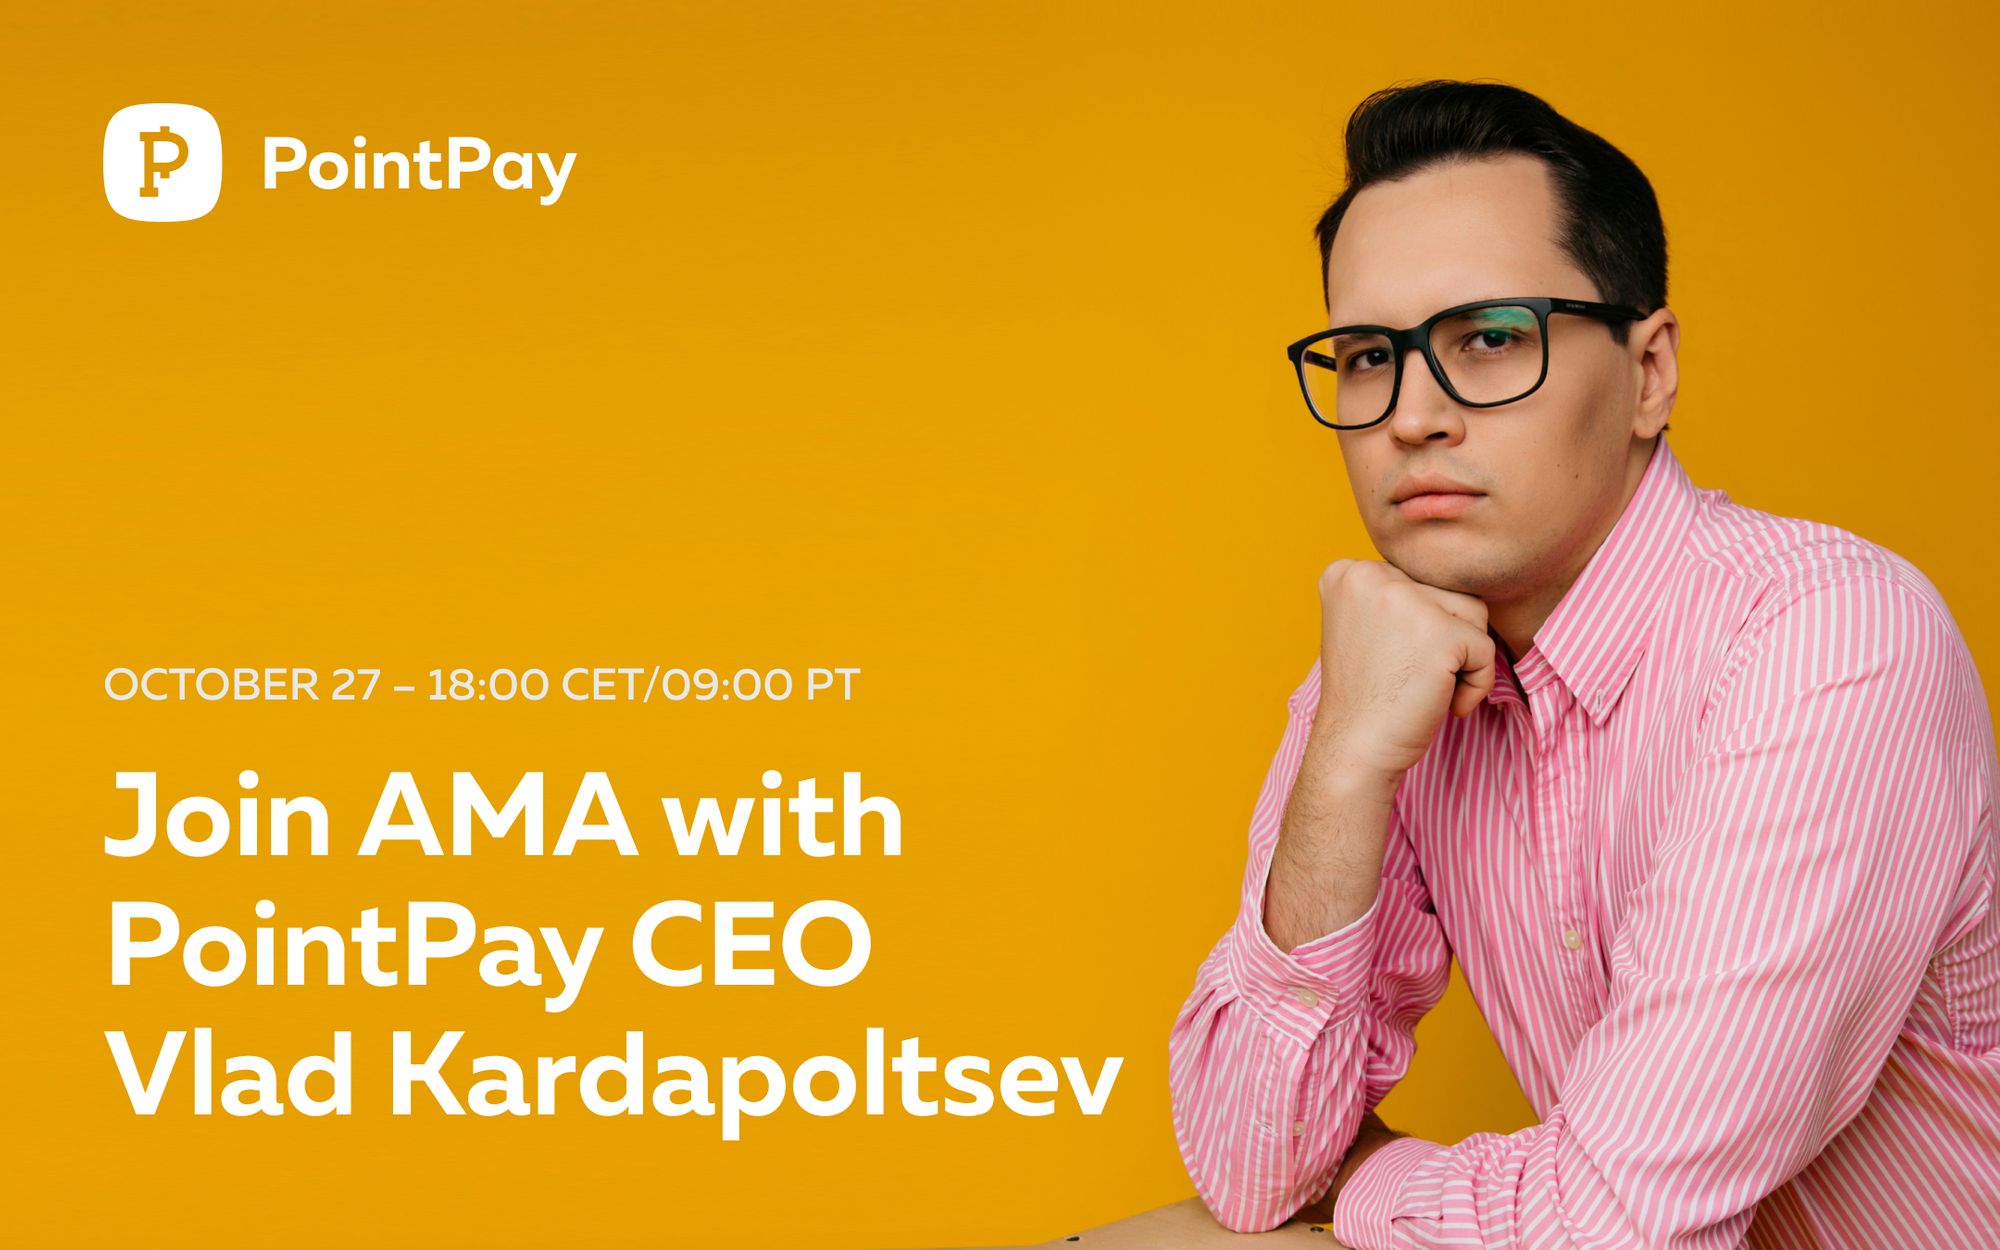 Join AMA with PointPay CEO Vladimir Kardapoltsev on the 28th of October 2022 (18:00 CET time)